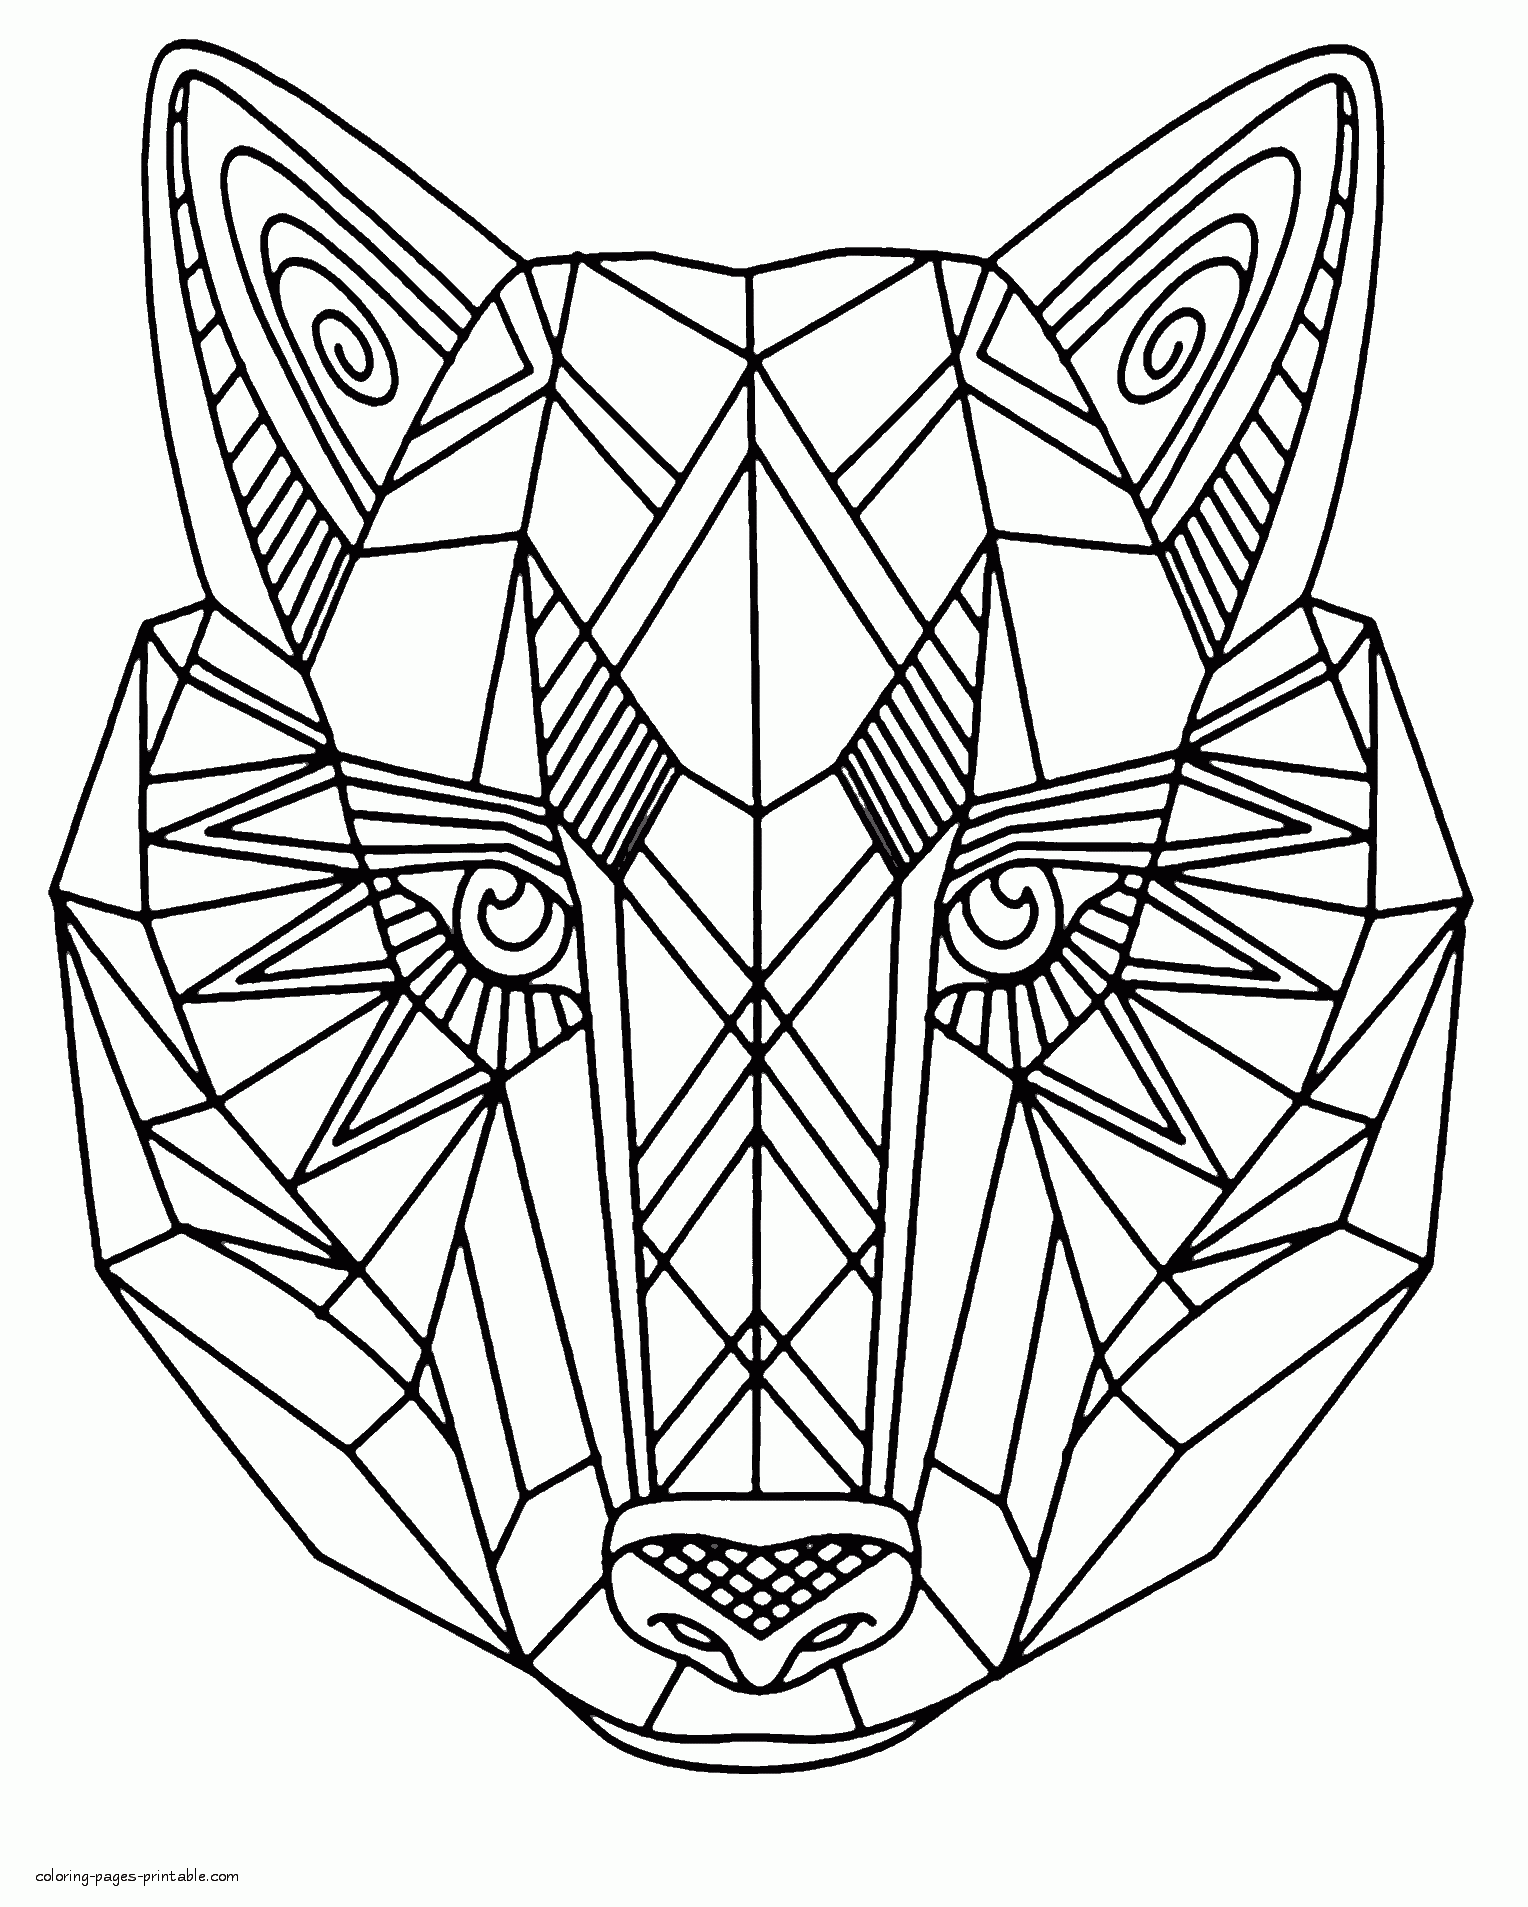 Zentangle Animal Face Coloring For Adults || COLORING-PAGES ...